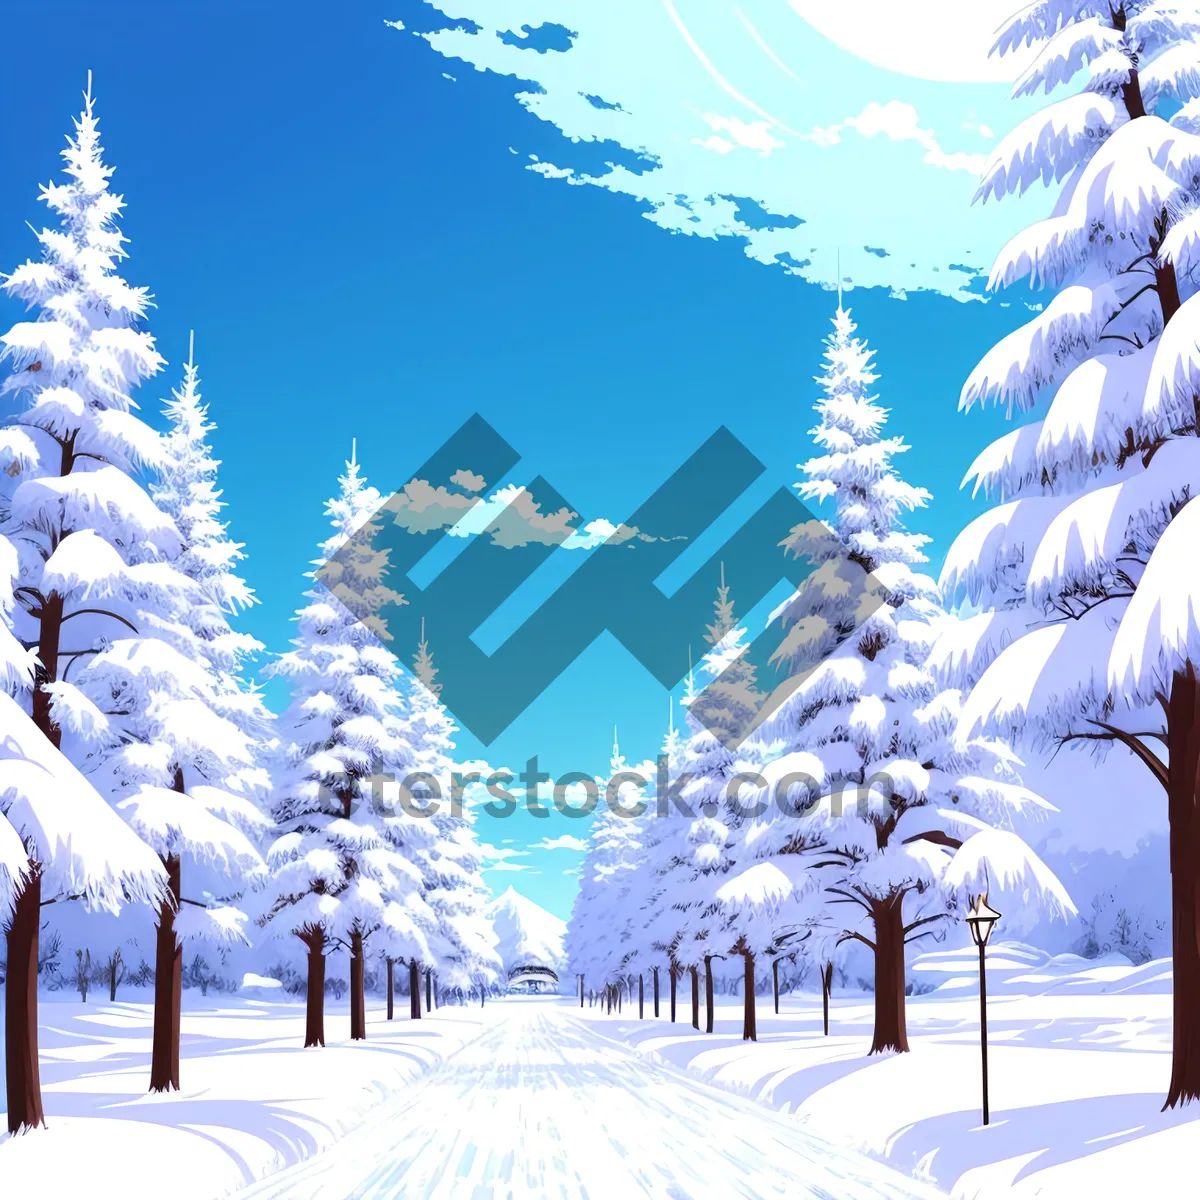 Picture of Winter Wonderland: Majestic Snow-Covered Mountain Landscape